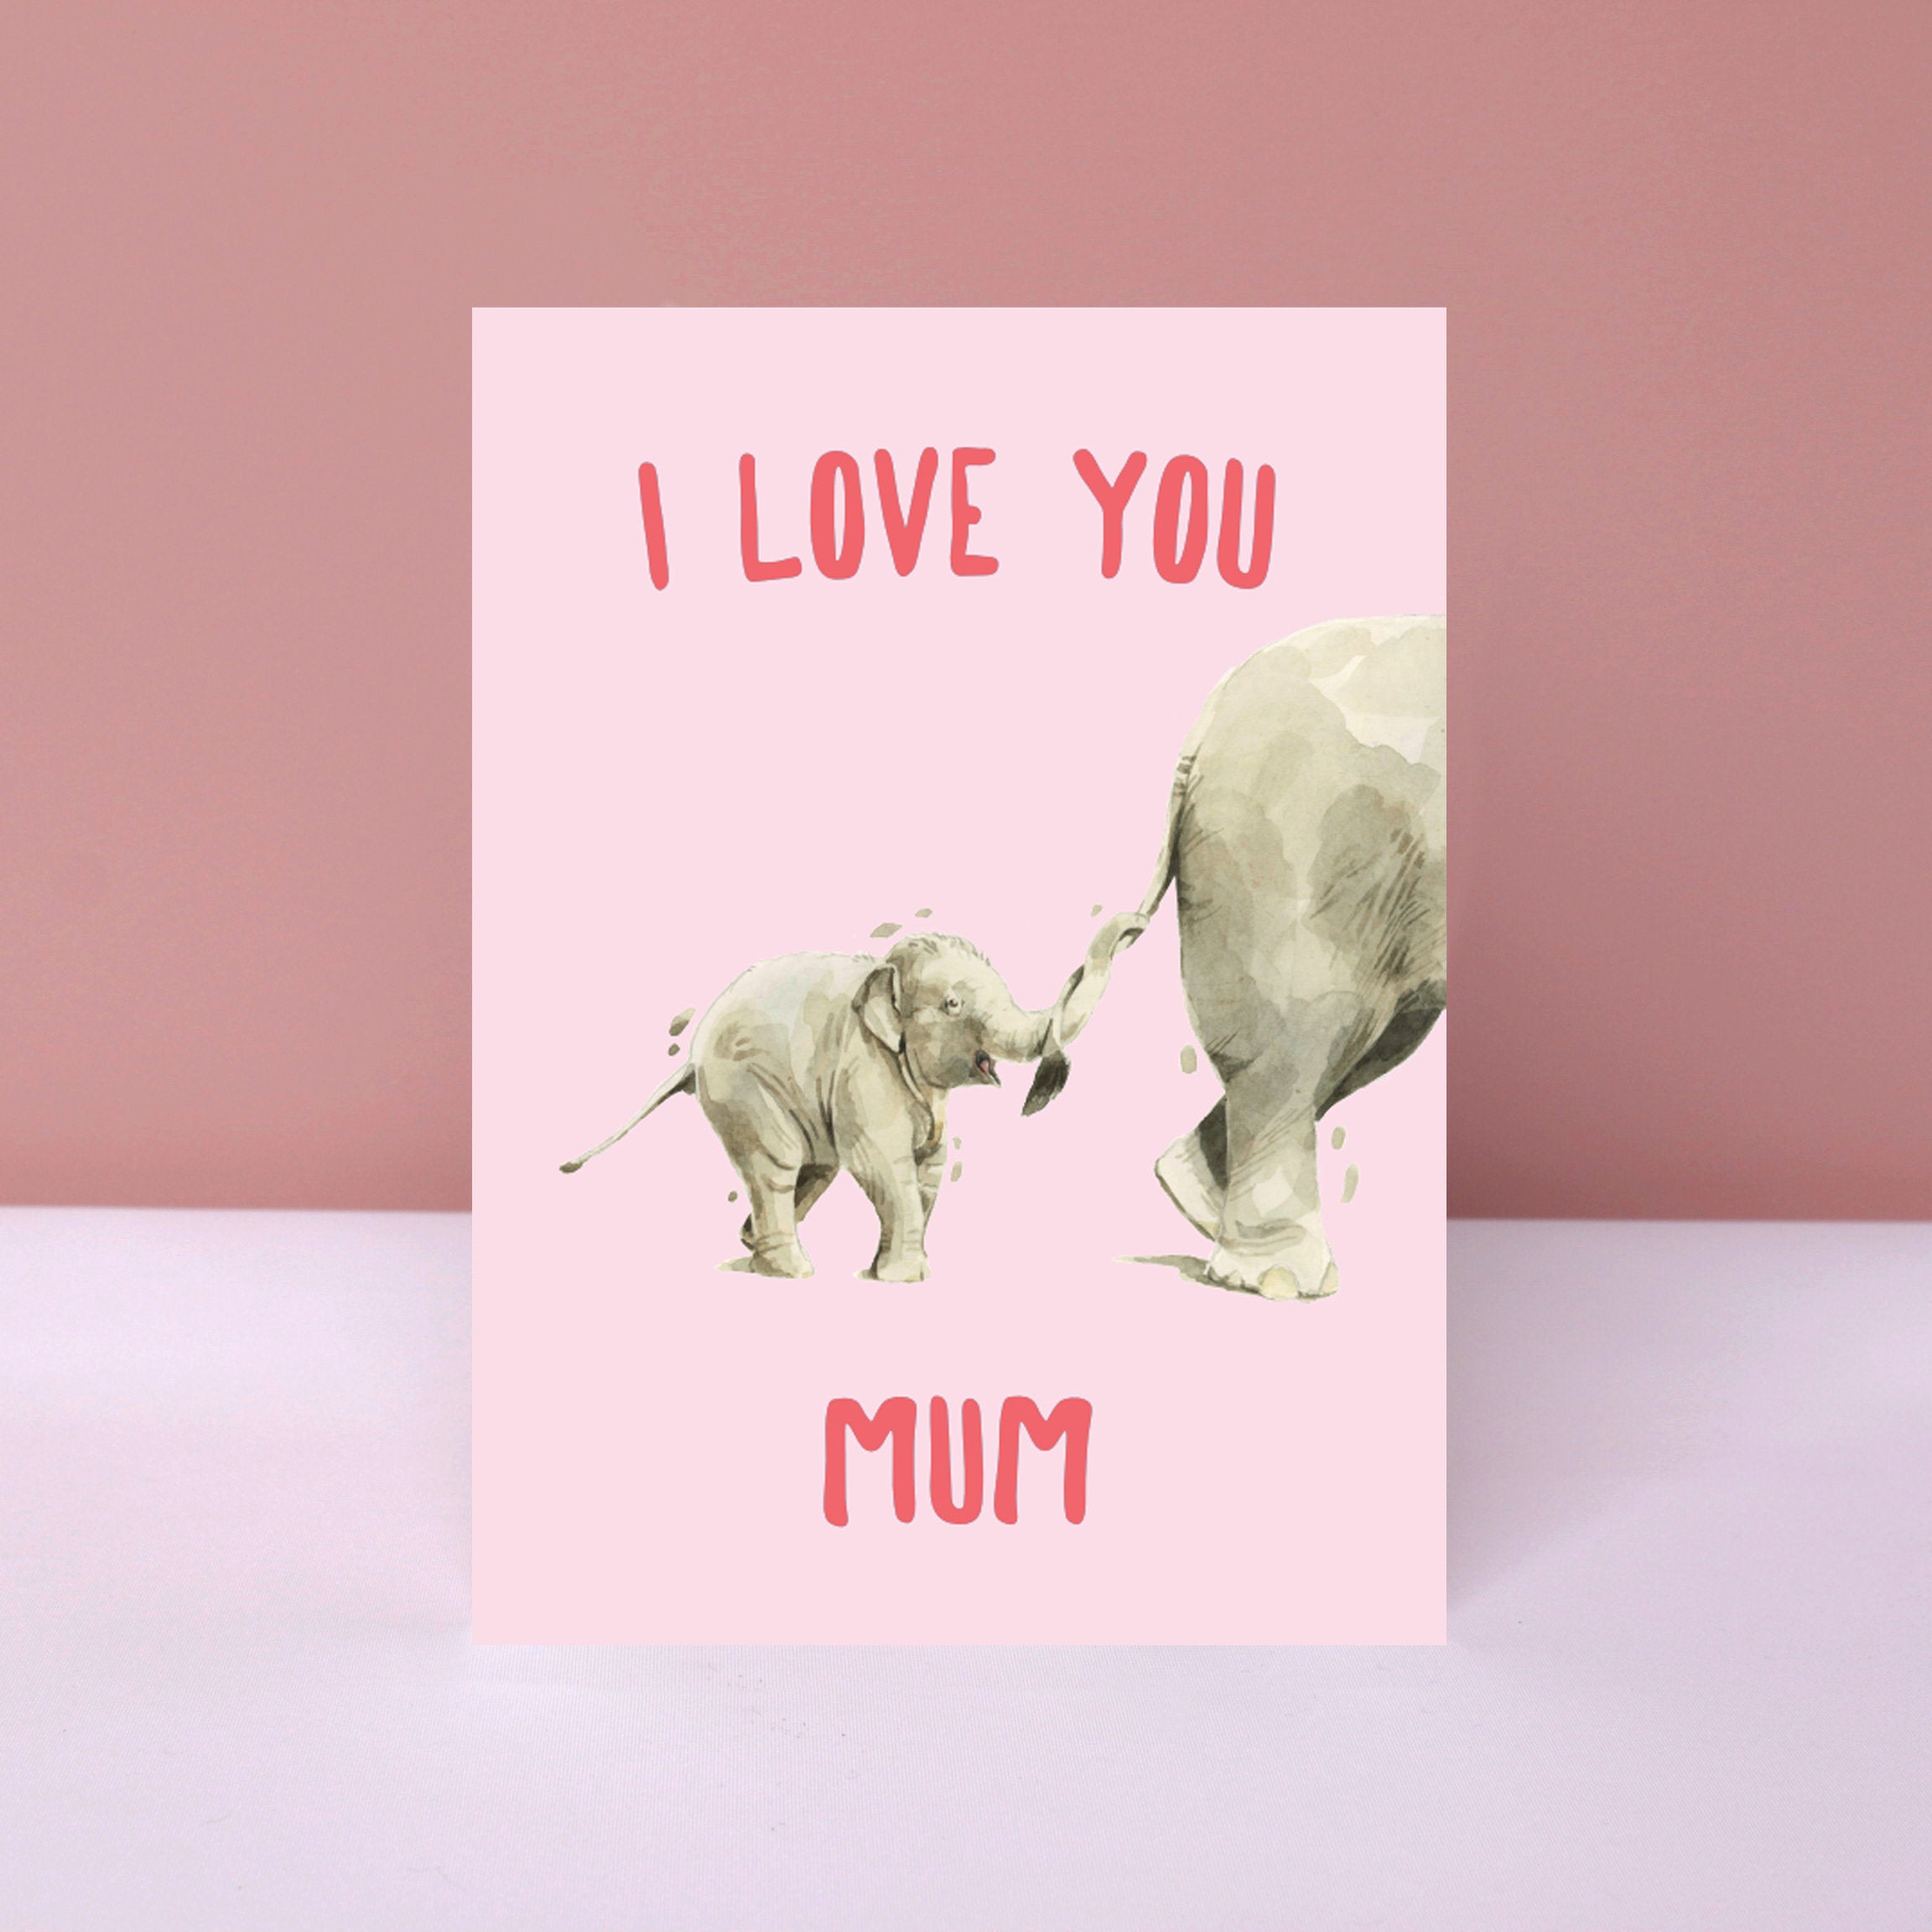 I Love You Mum, Elephant Card for Mothers Day, Mum's Birthday